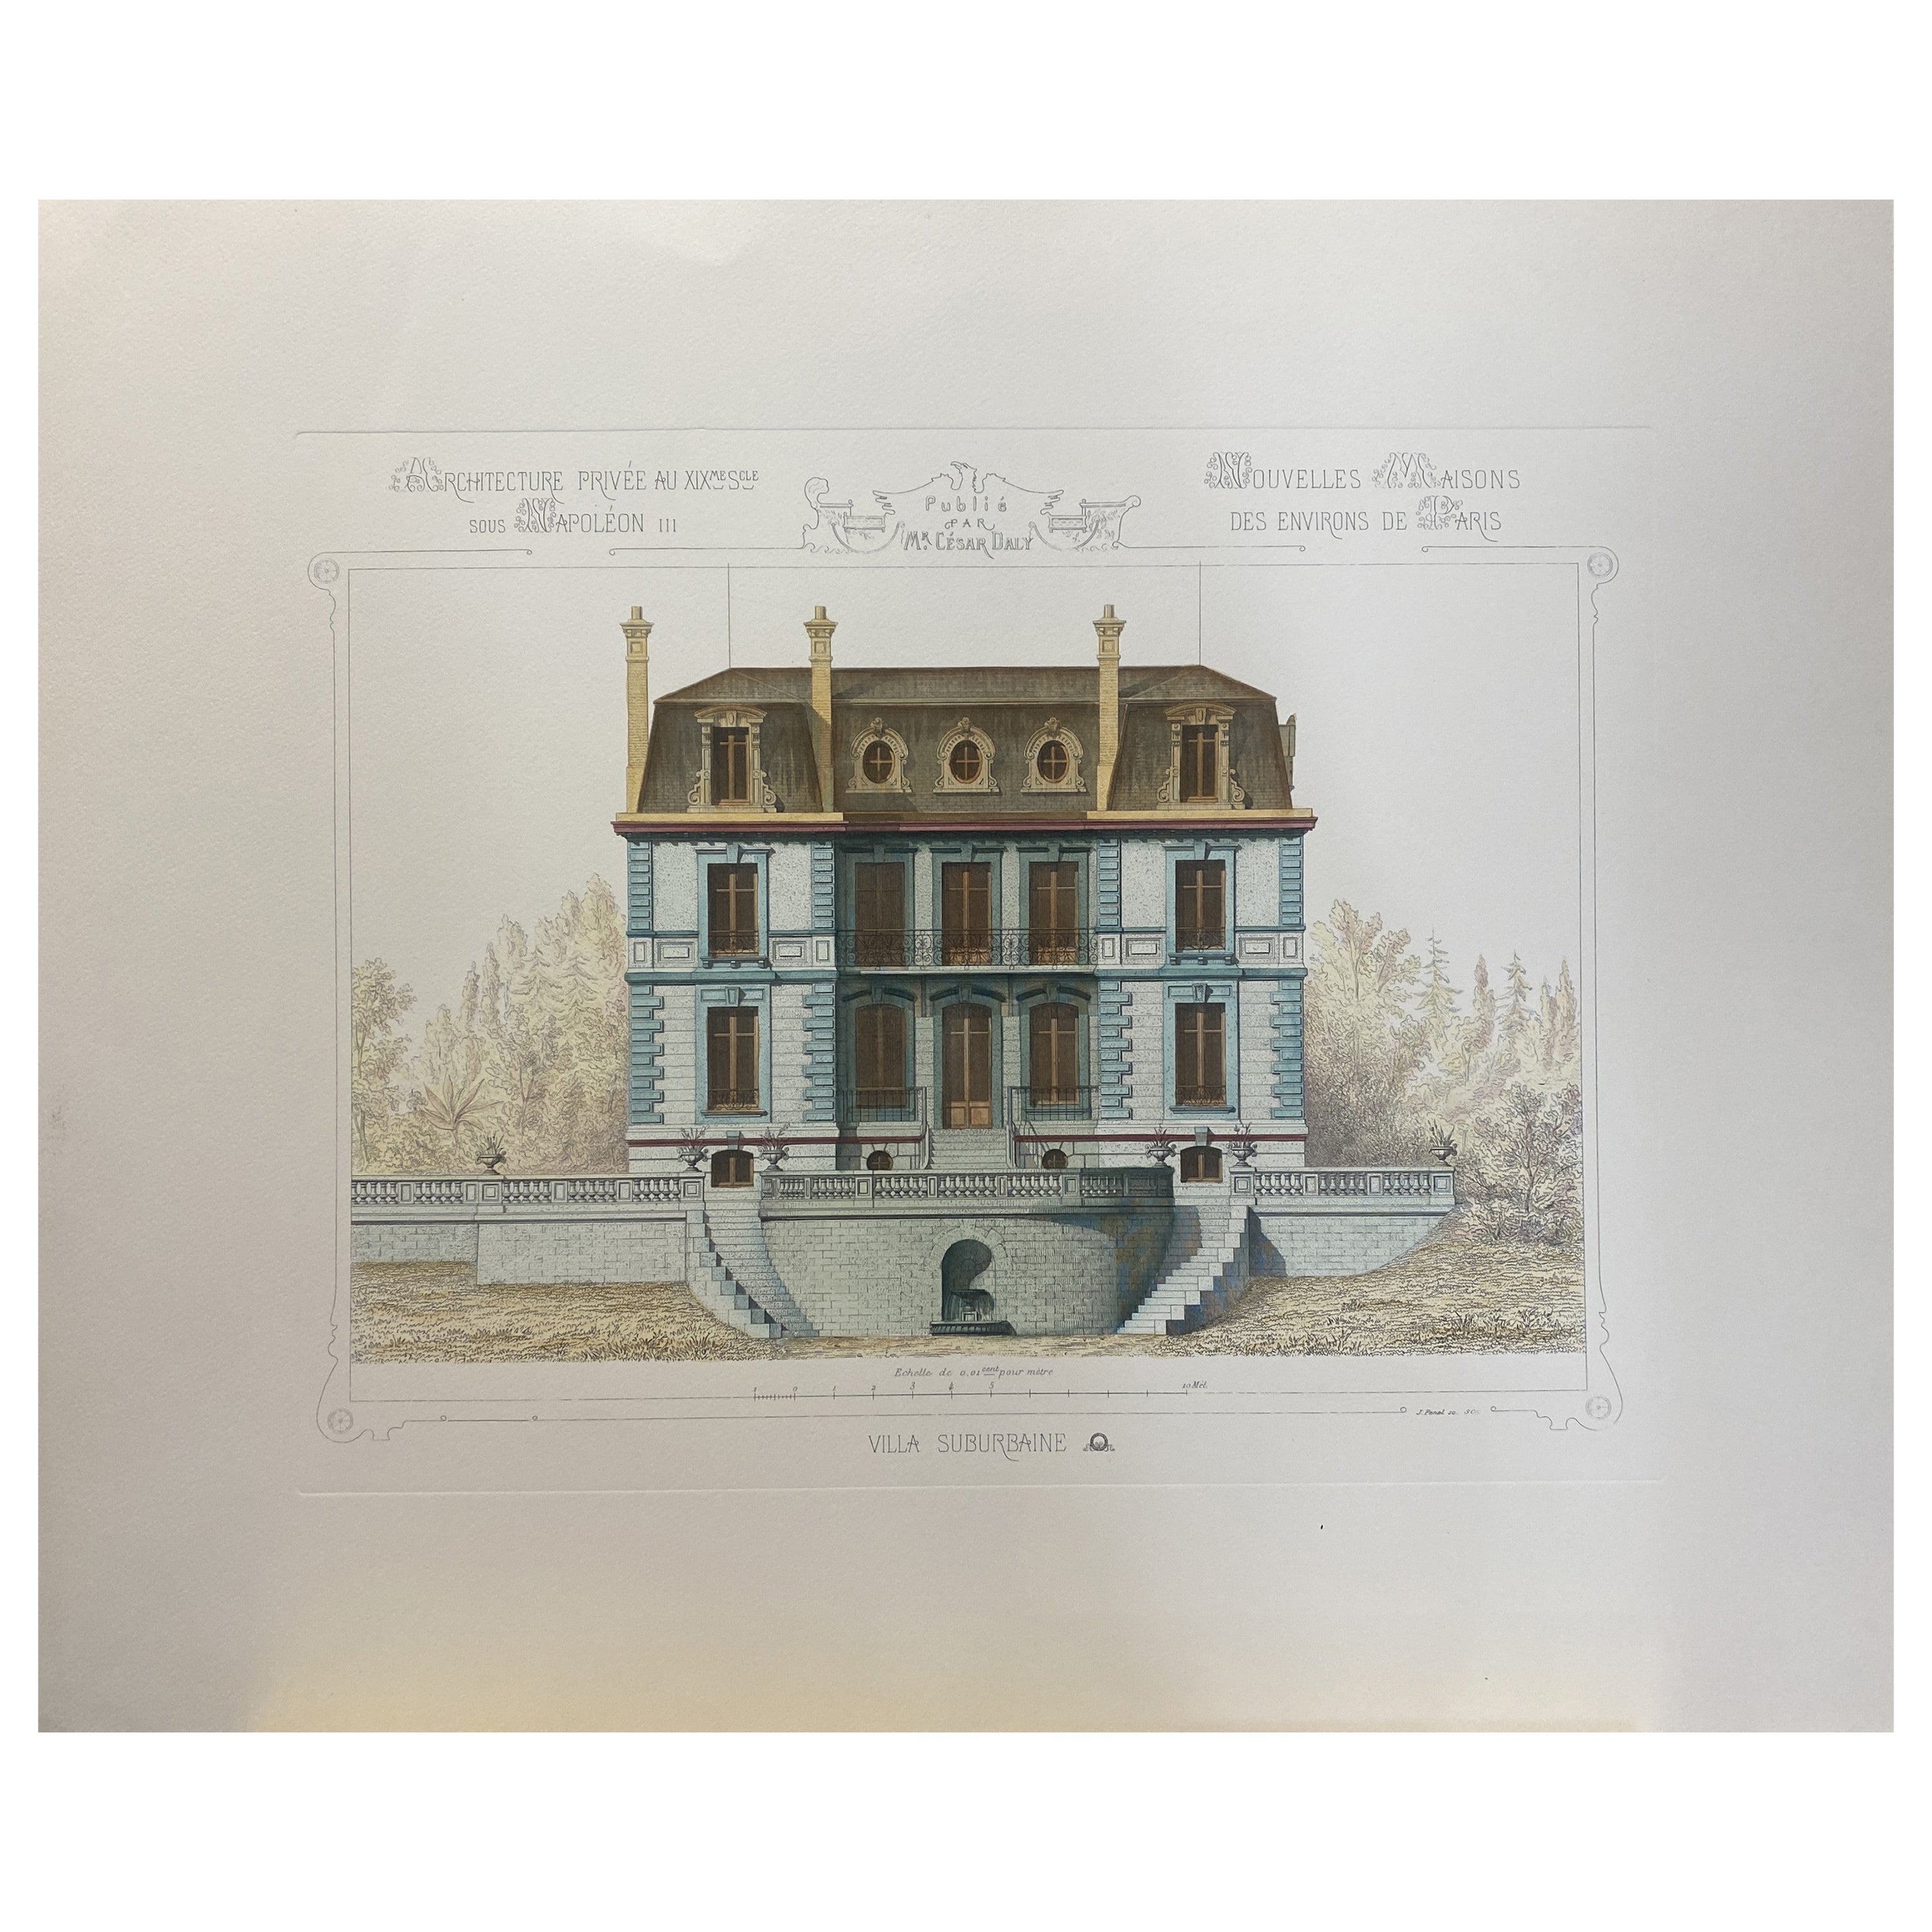 Italian French Architecture Priveè by Cesar Daly Hand Painted Print 1 of 2